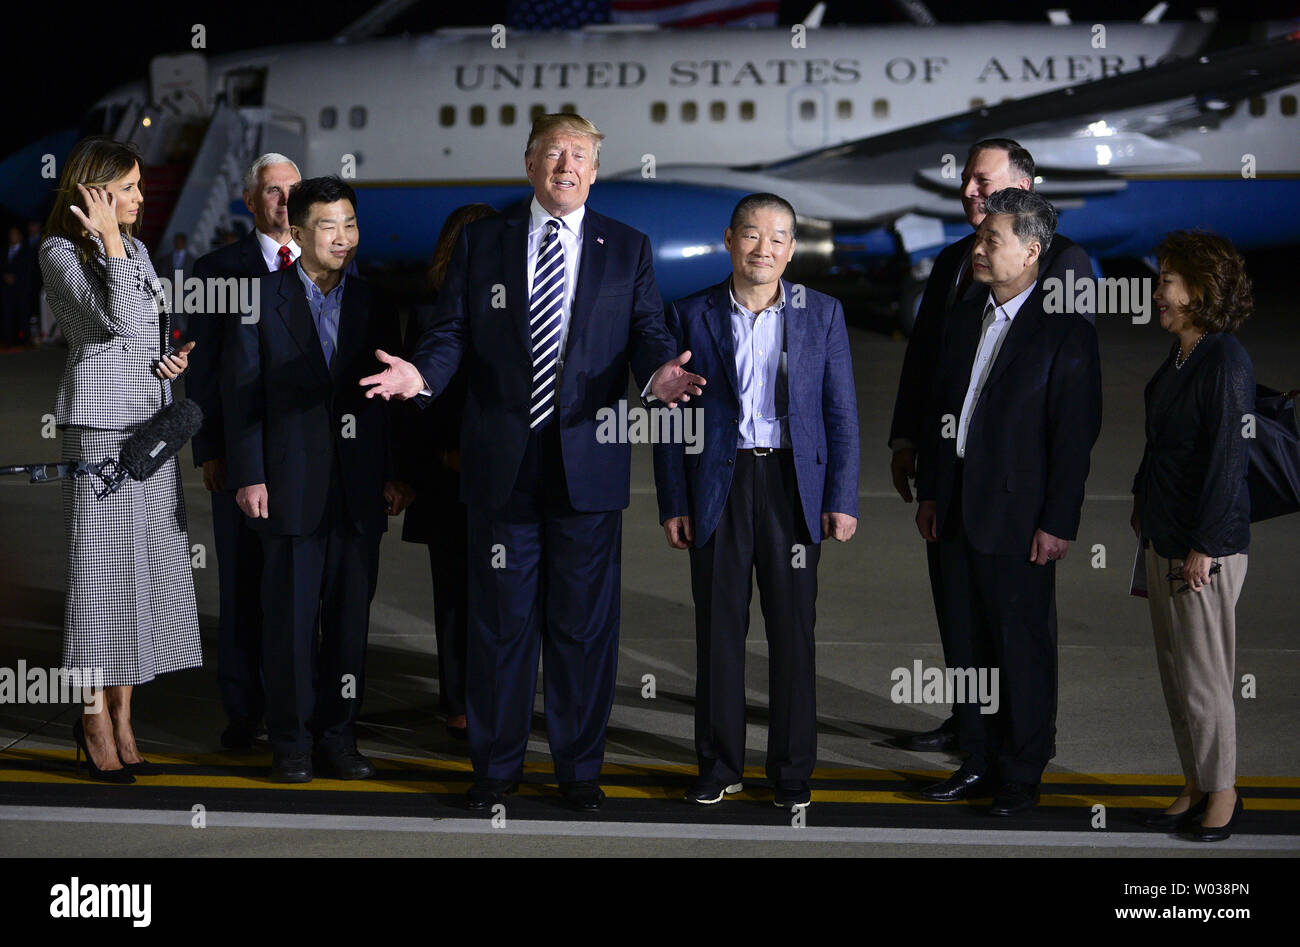 President Donald Trump speaks with members of the media after greetin three American citizens Kim Hak-Song, Kim Dong-Chul, and Kim Sang-Duk, who were detained in North Korea, at Joint Base Andrews in Maryland on May 10, 2018. Photo by Leigh Vogel/UPI Stock Photo